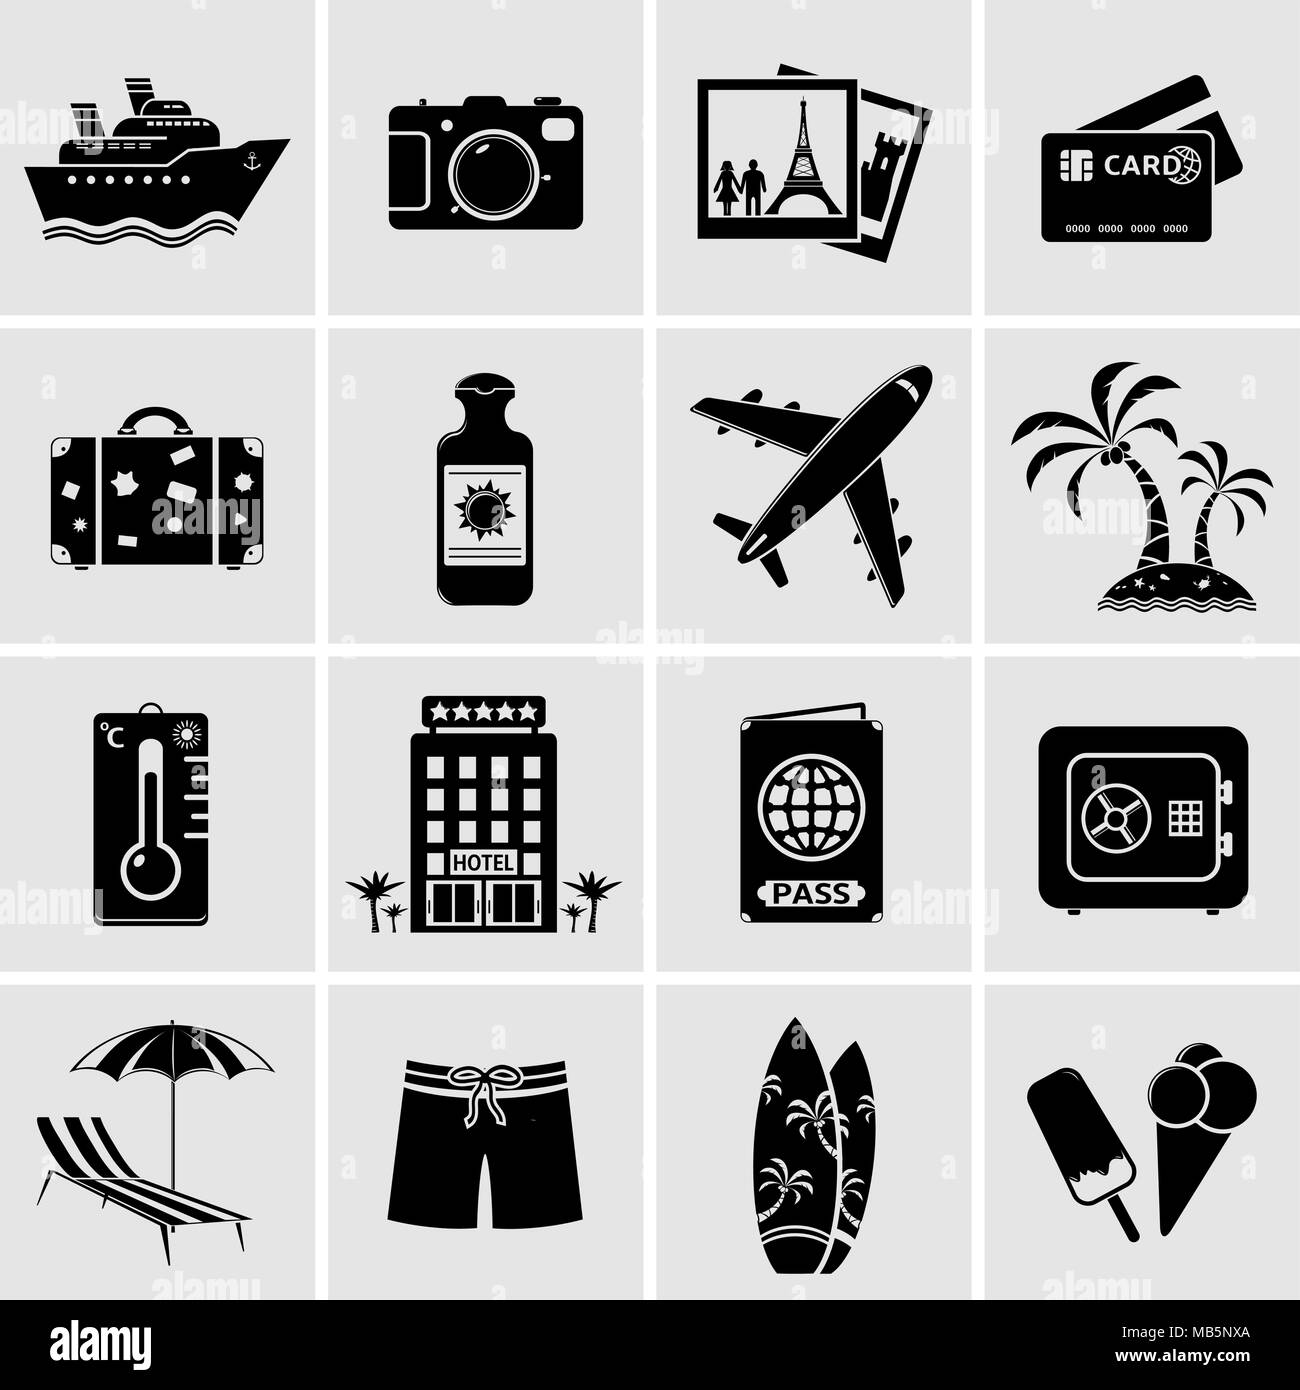 Travel icons - Vector illustration Stock Vector